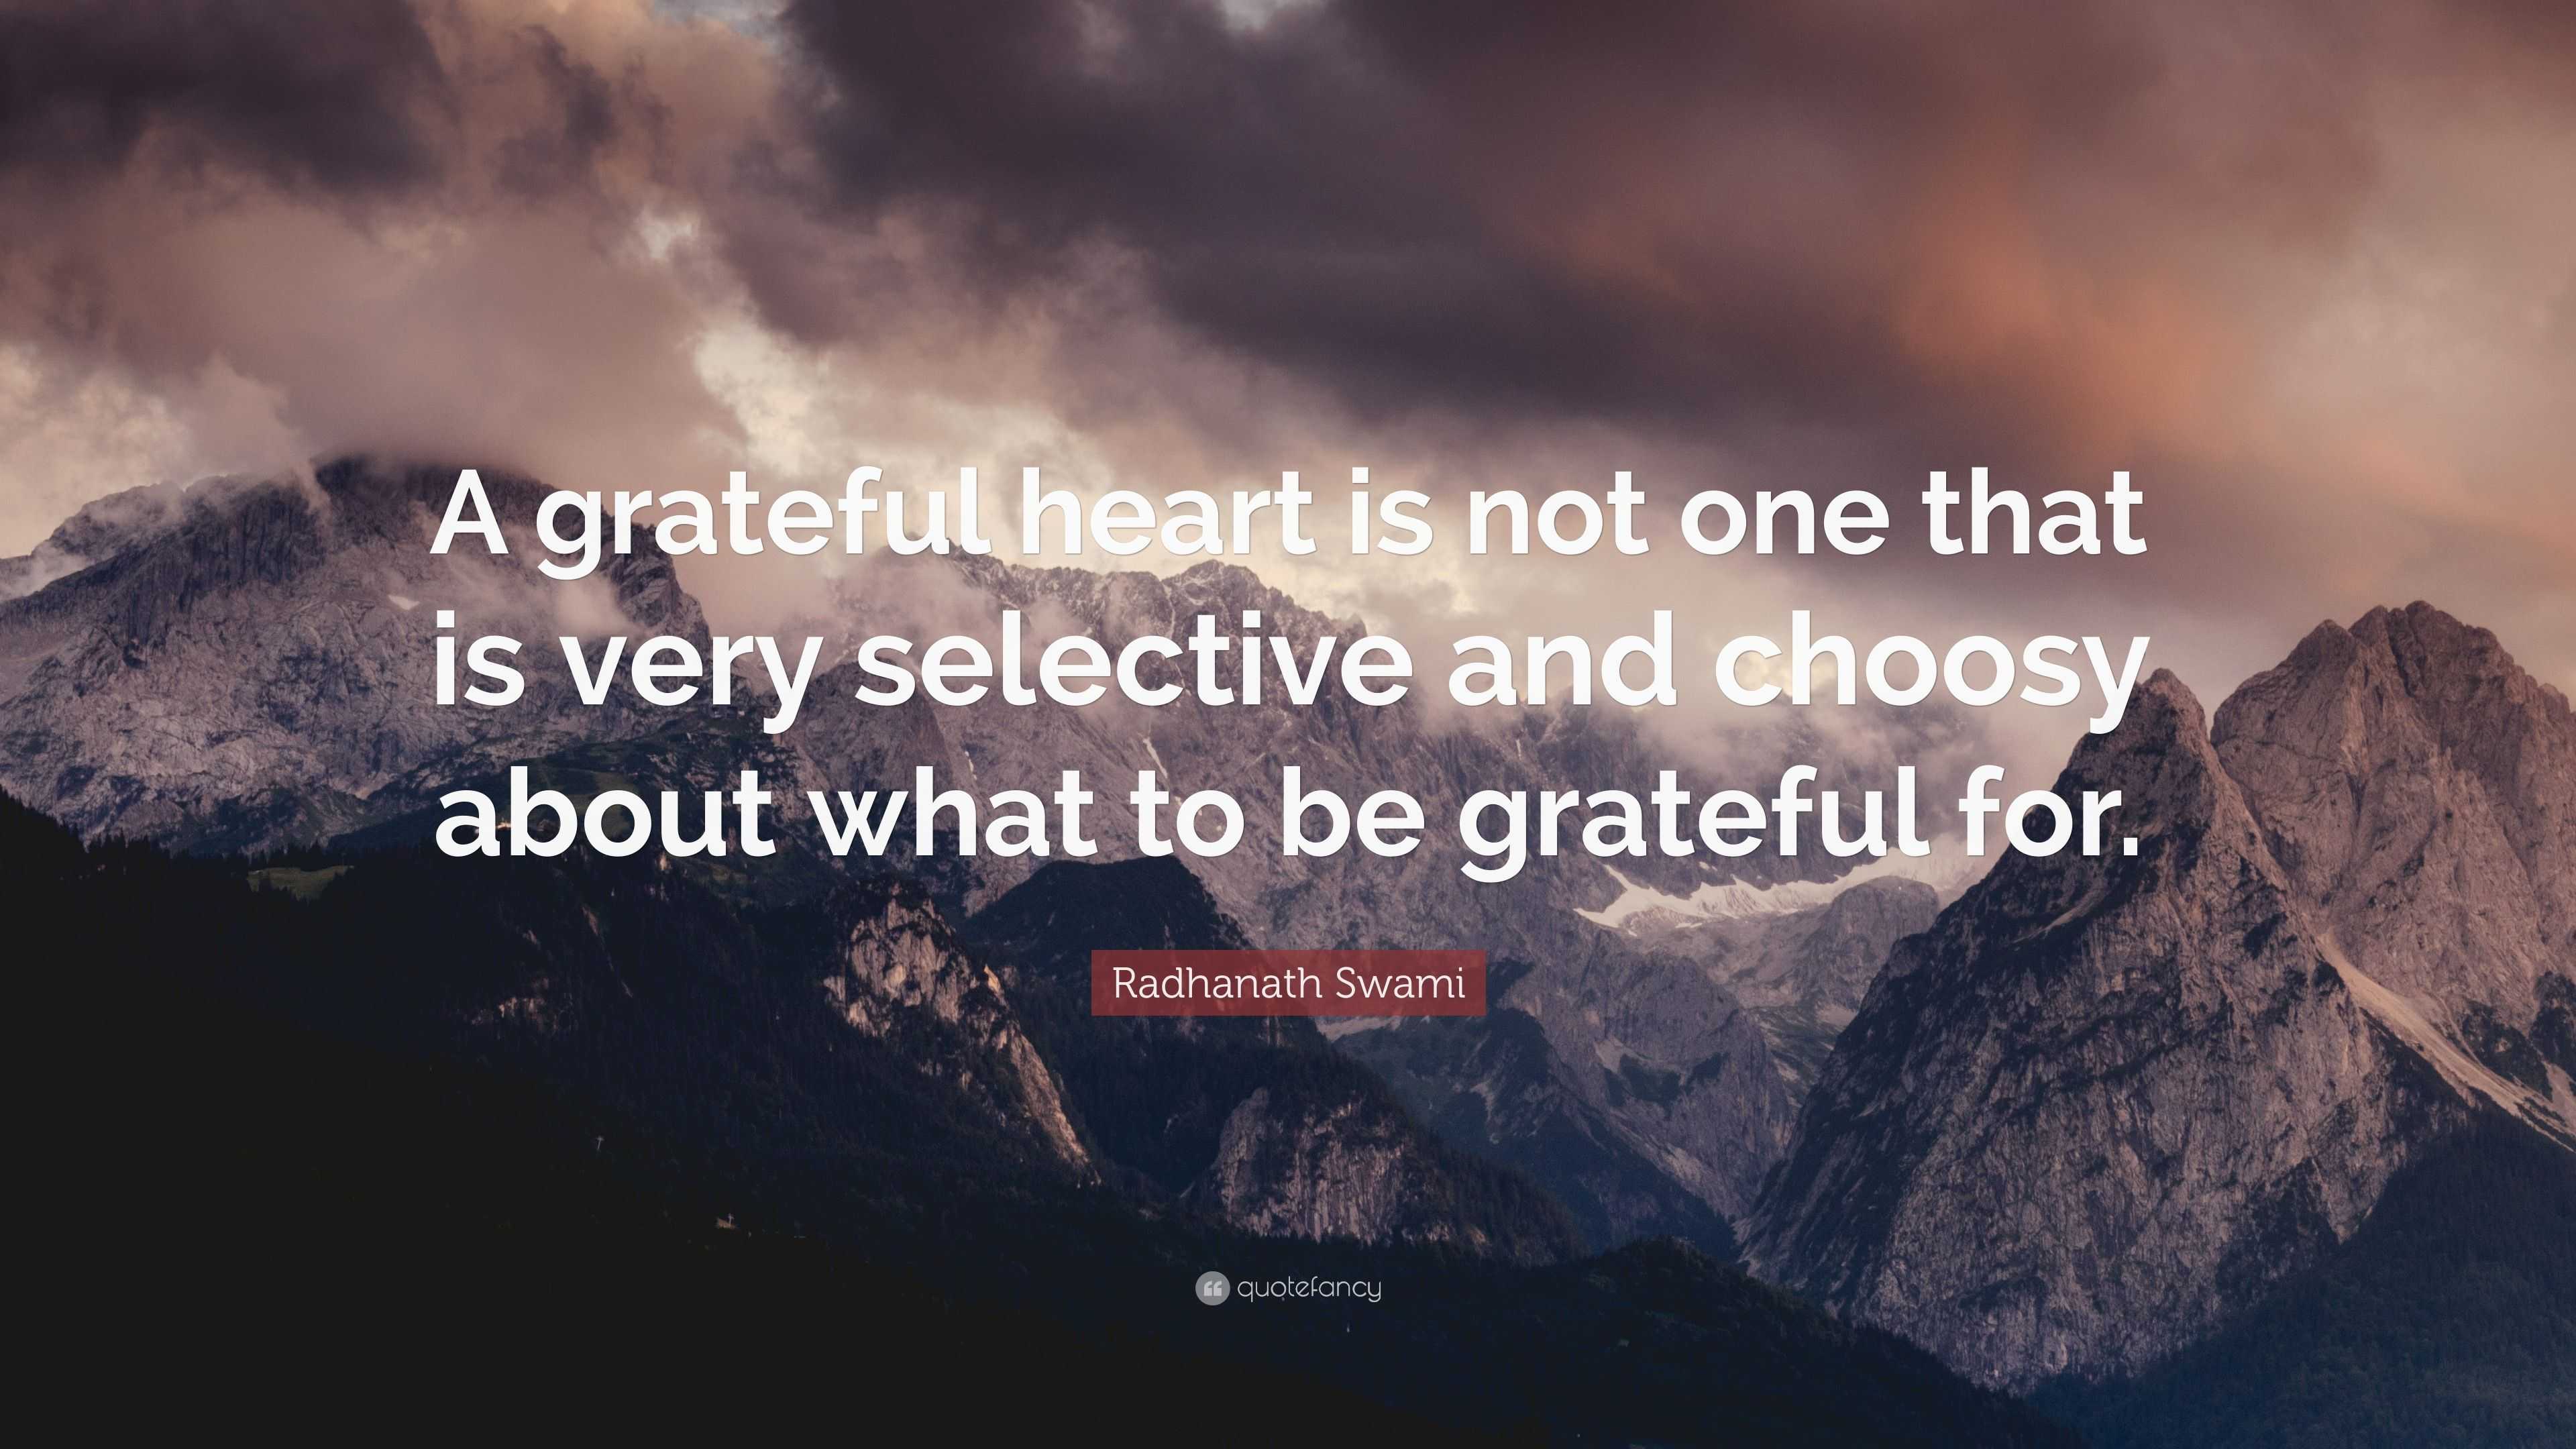 Radhanath Swami Quote: “A grateful heart is not one that is very